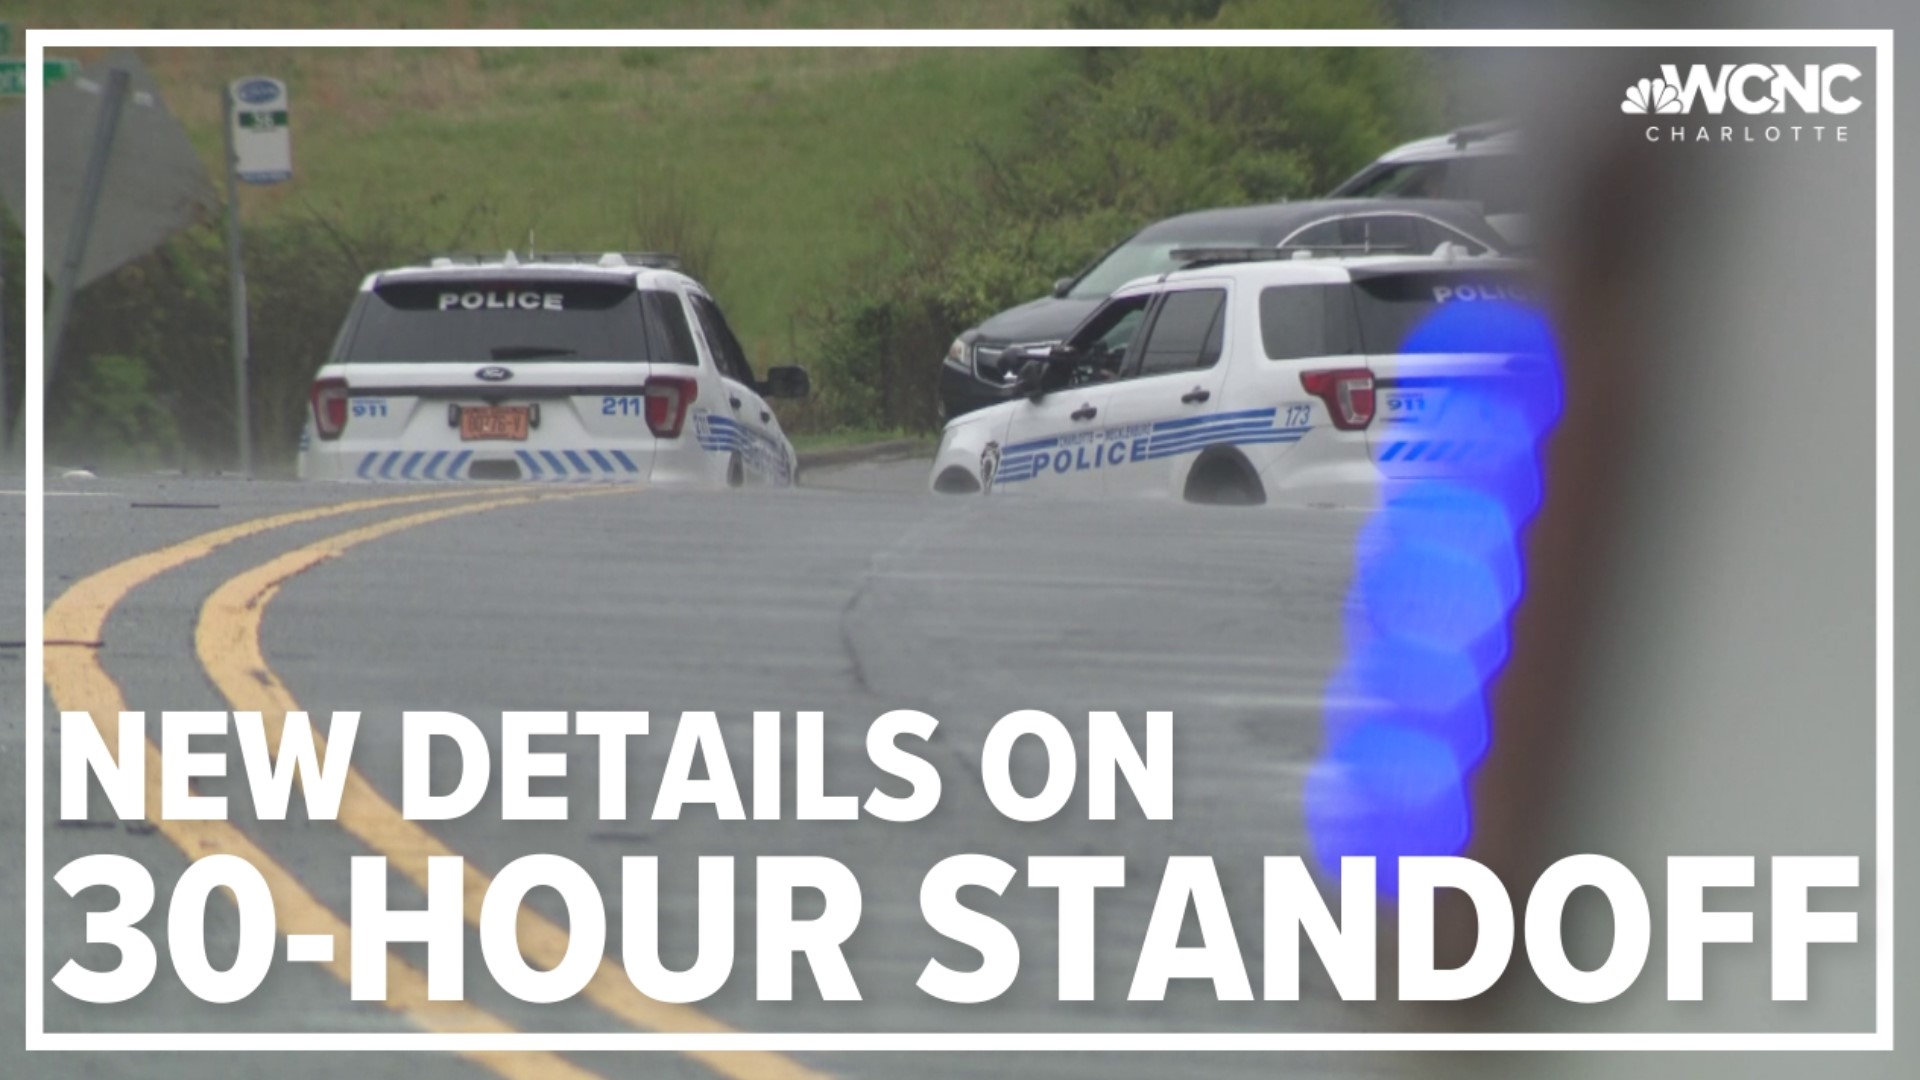 The 30+ hour standoff was successfully de-escalated Sunday afternoon, police said.